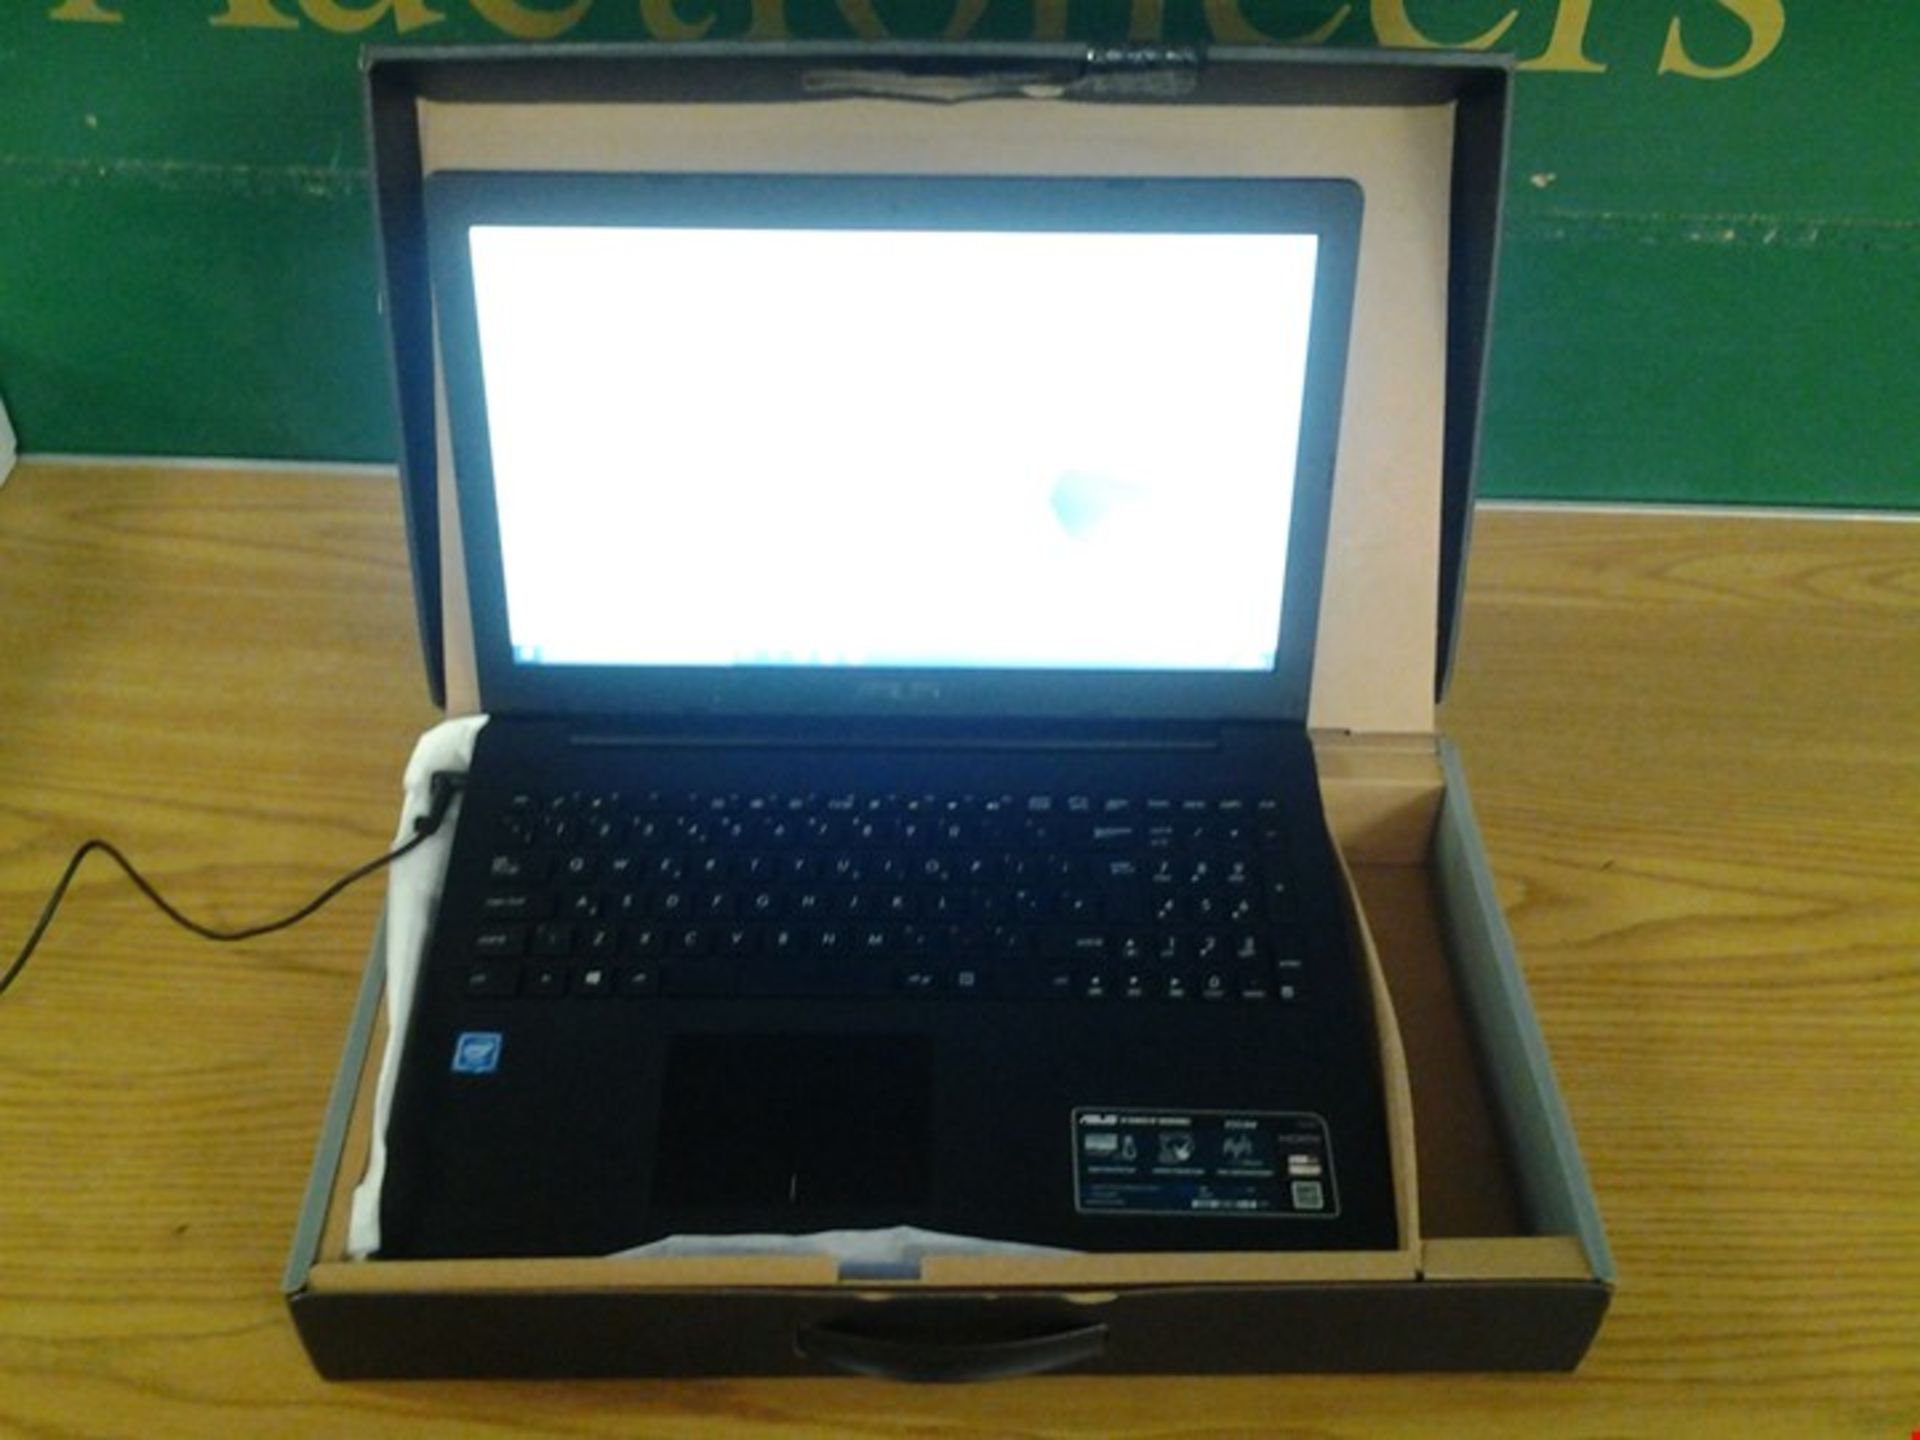 BOXED ASUS SONICMASTER LAPTOP WITH CHARGER